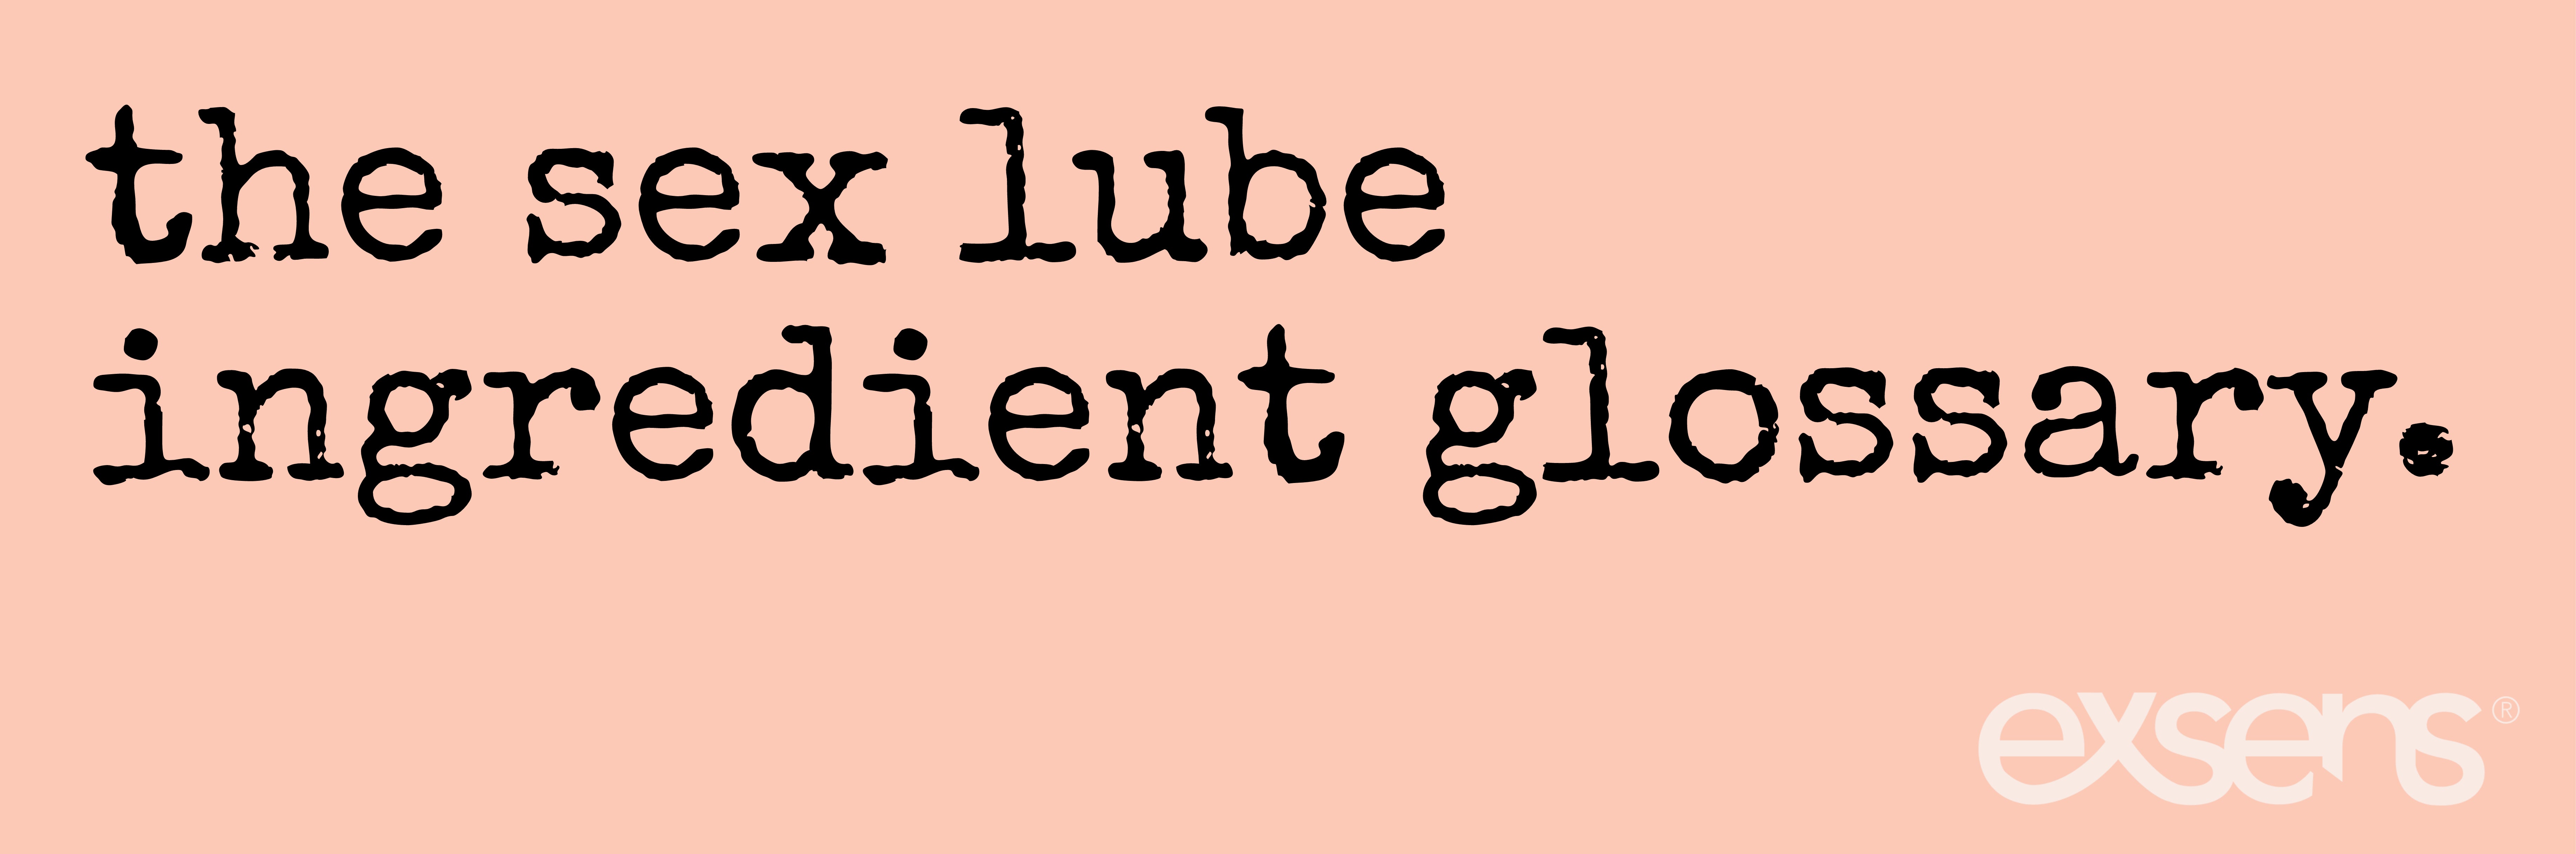 Lube Lessons 3 The Sex Lube Ingredient Glossary